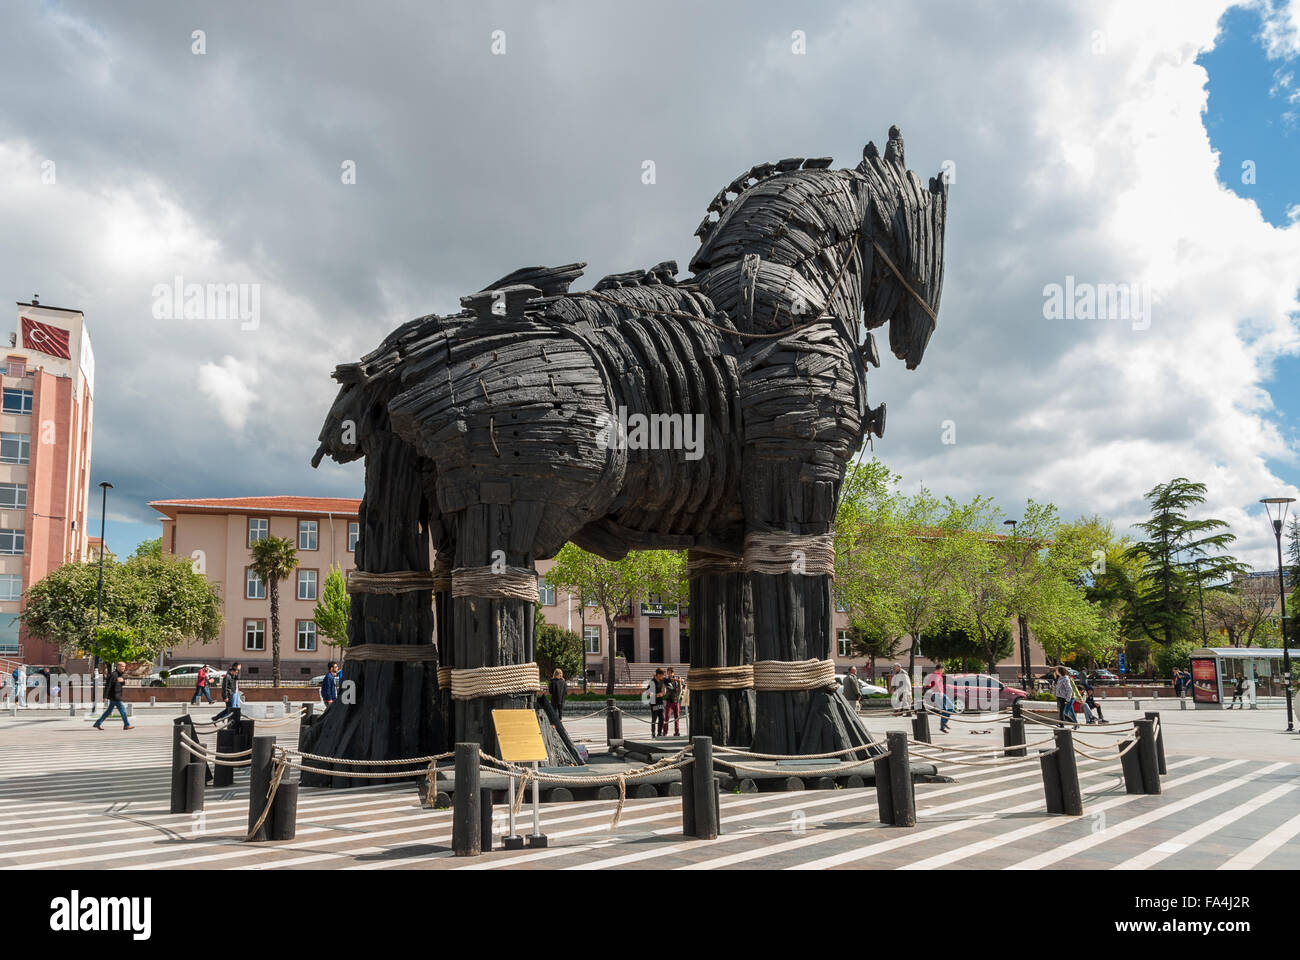 Local people and tourists walk near the Movie-famous Trojan Horse on April 19, 2014 in Canakkale, Turkey. Stock Photo